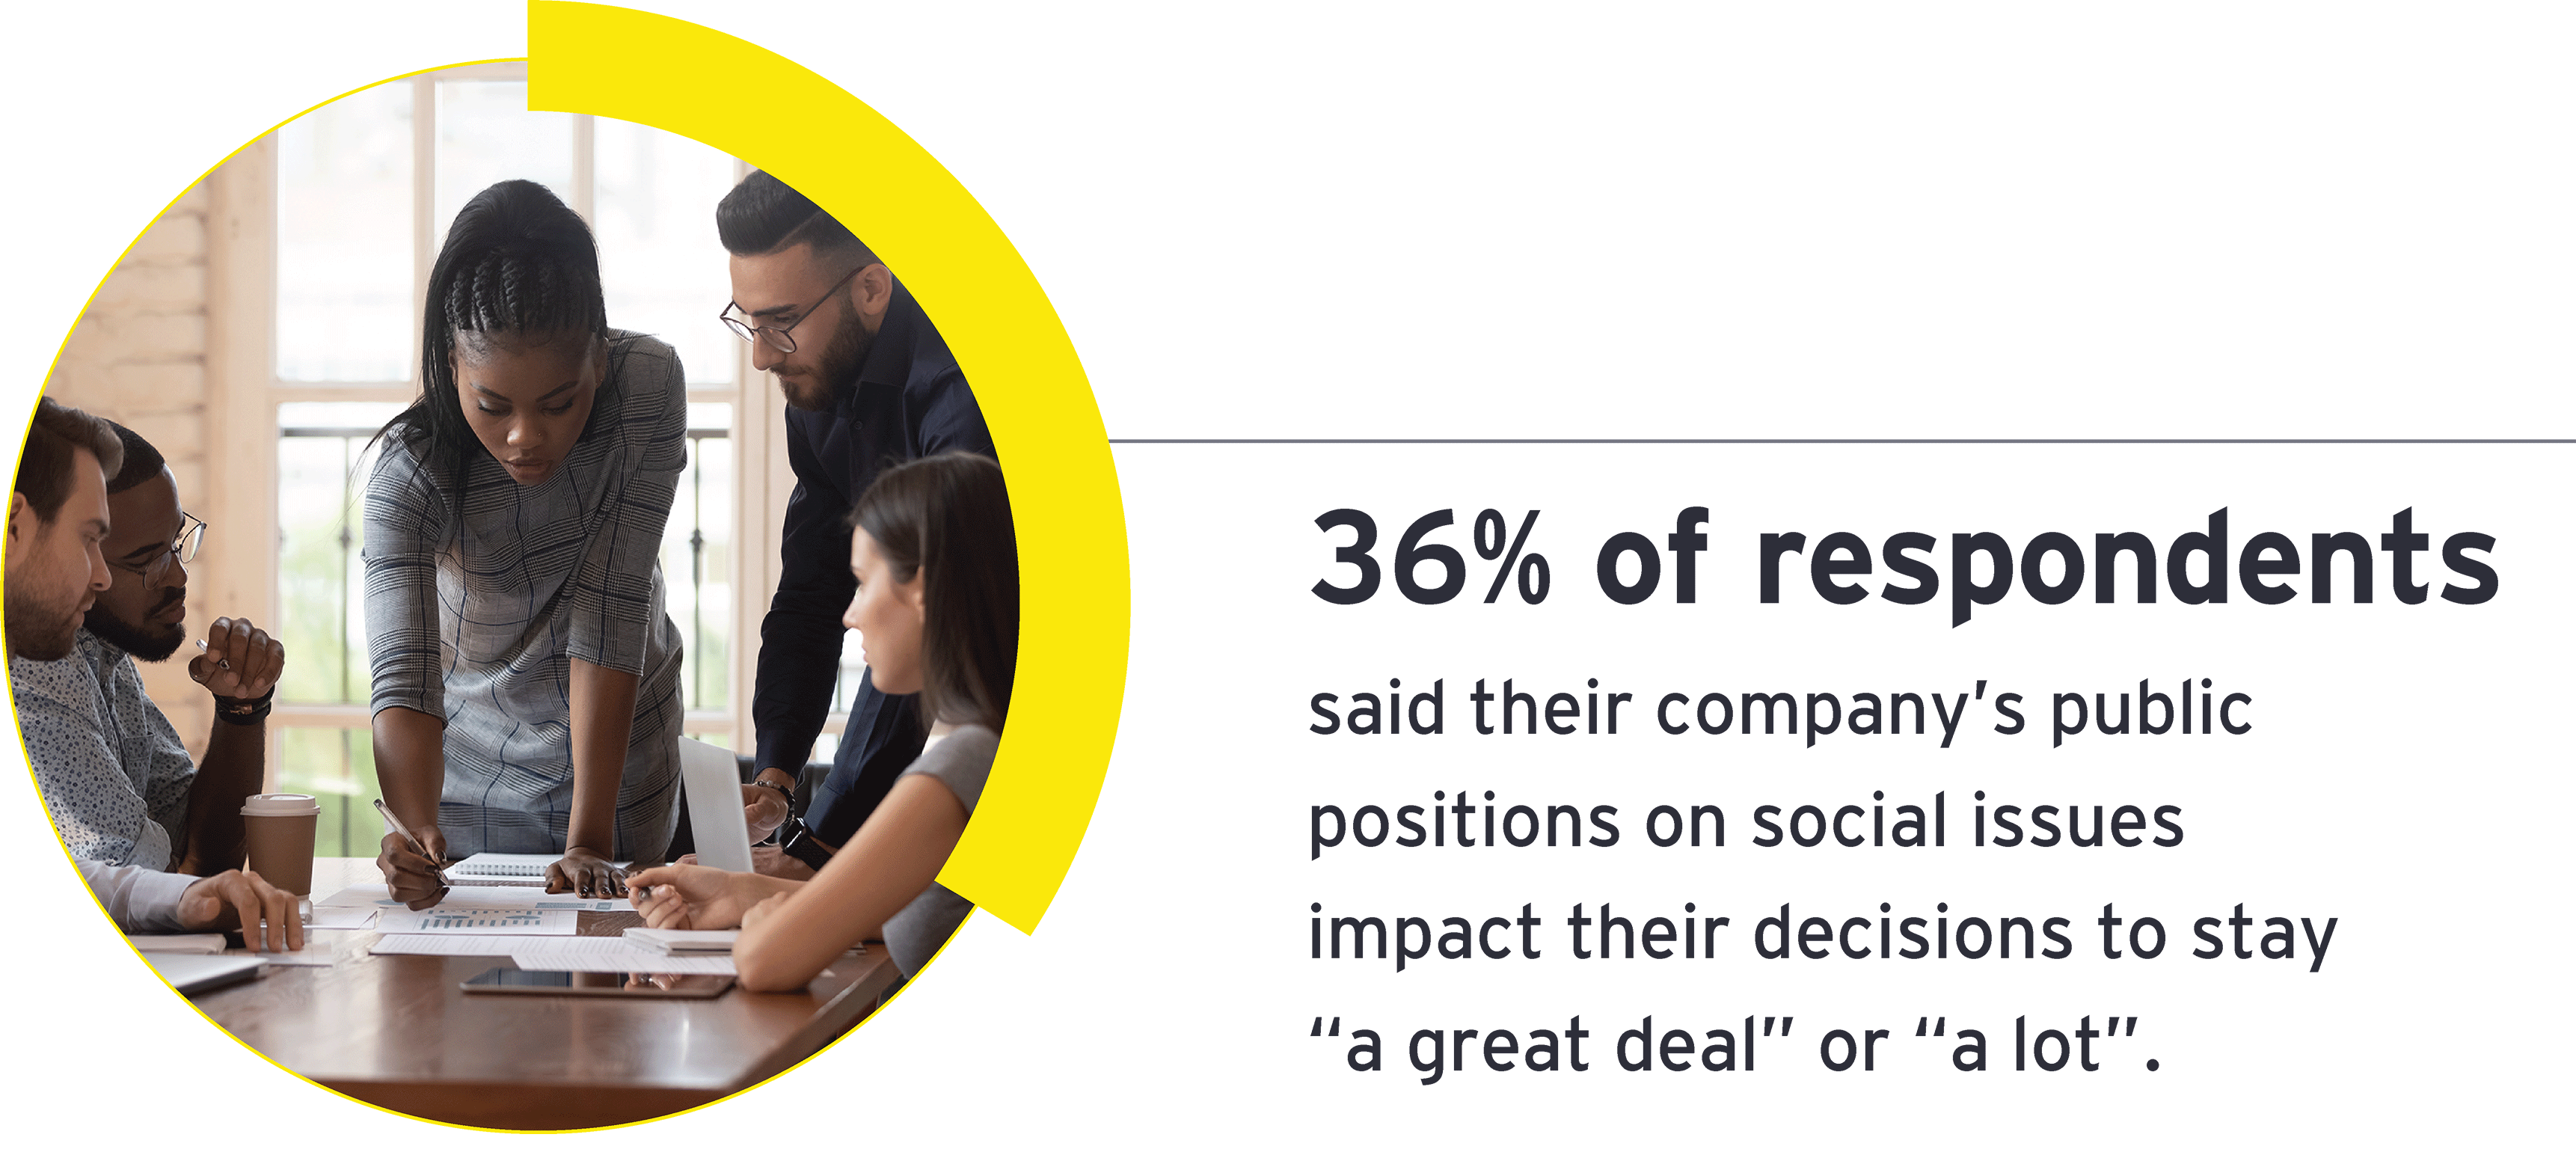 36% of respondents said their company’s public positions on social issues impact their decisions to stay “a great deal” or “a lot.”  